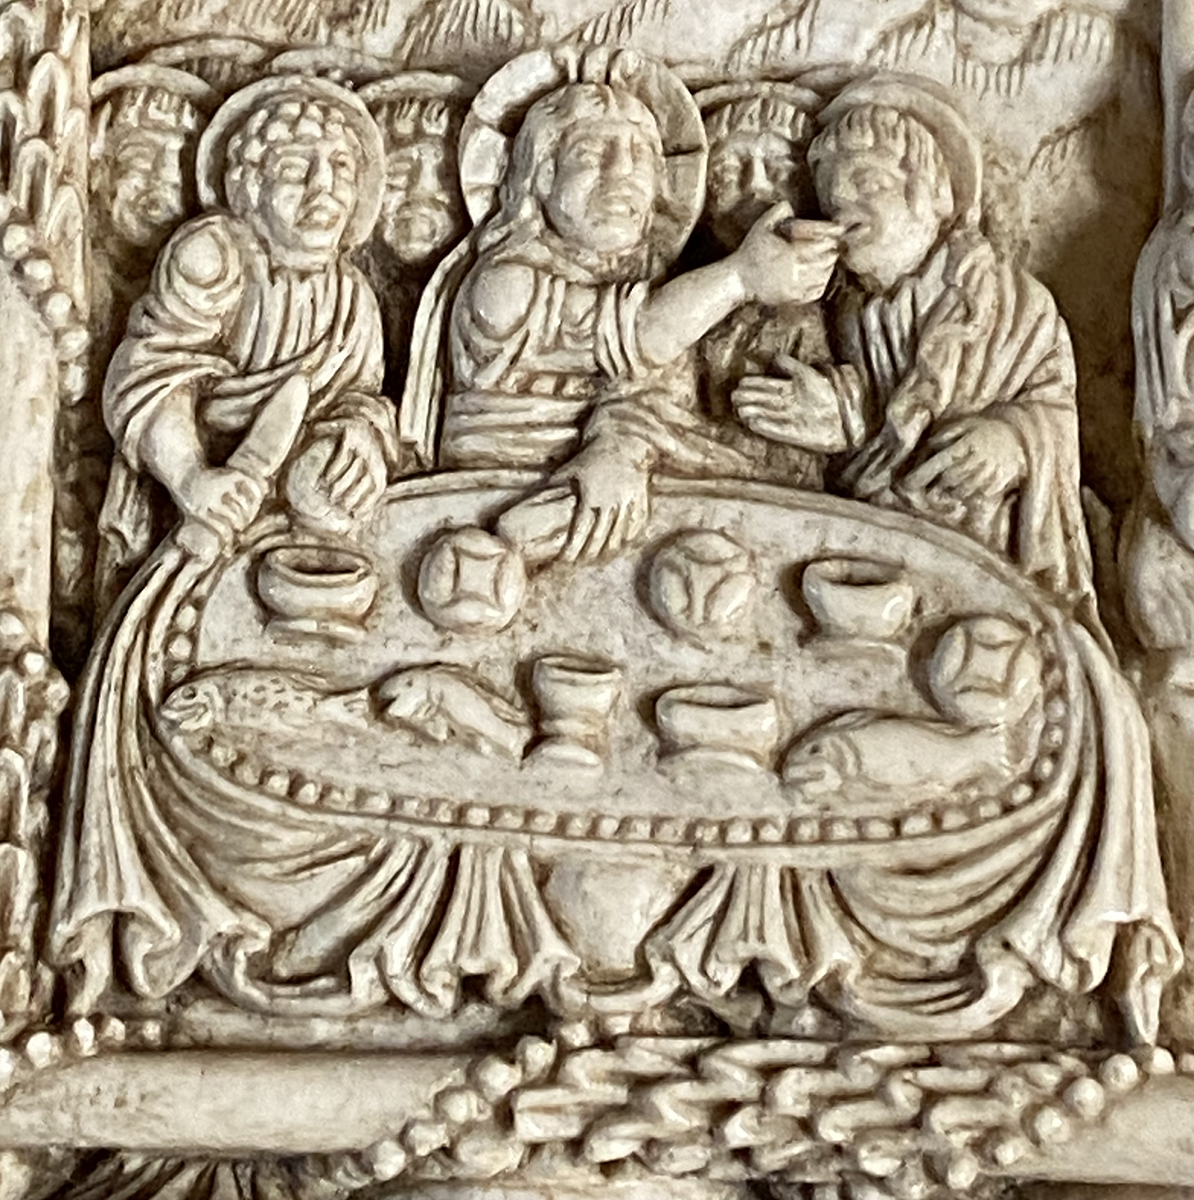 A detail of an ivory plaque that contains a depiction of multiple men, of which three are in the foreground, behind a table containing fish, bread, bowls, and a chalice.